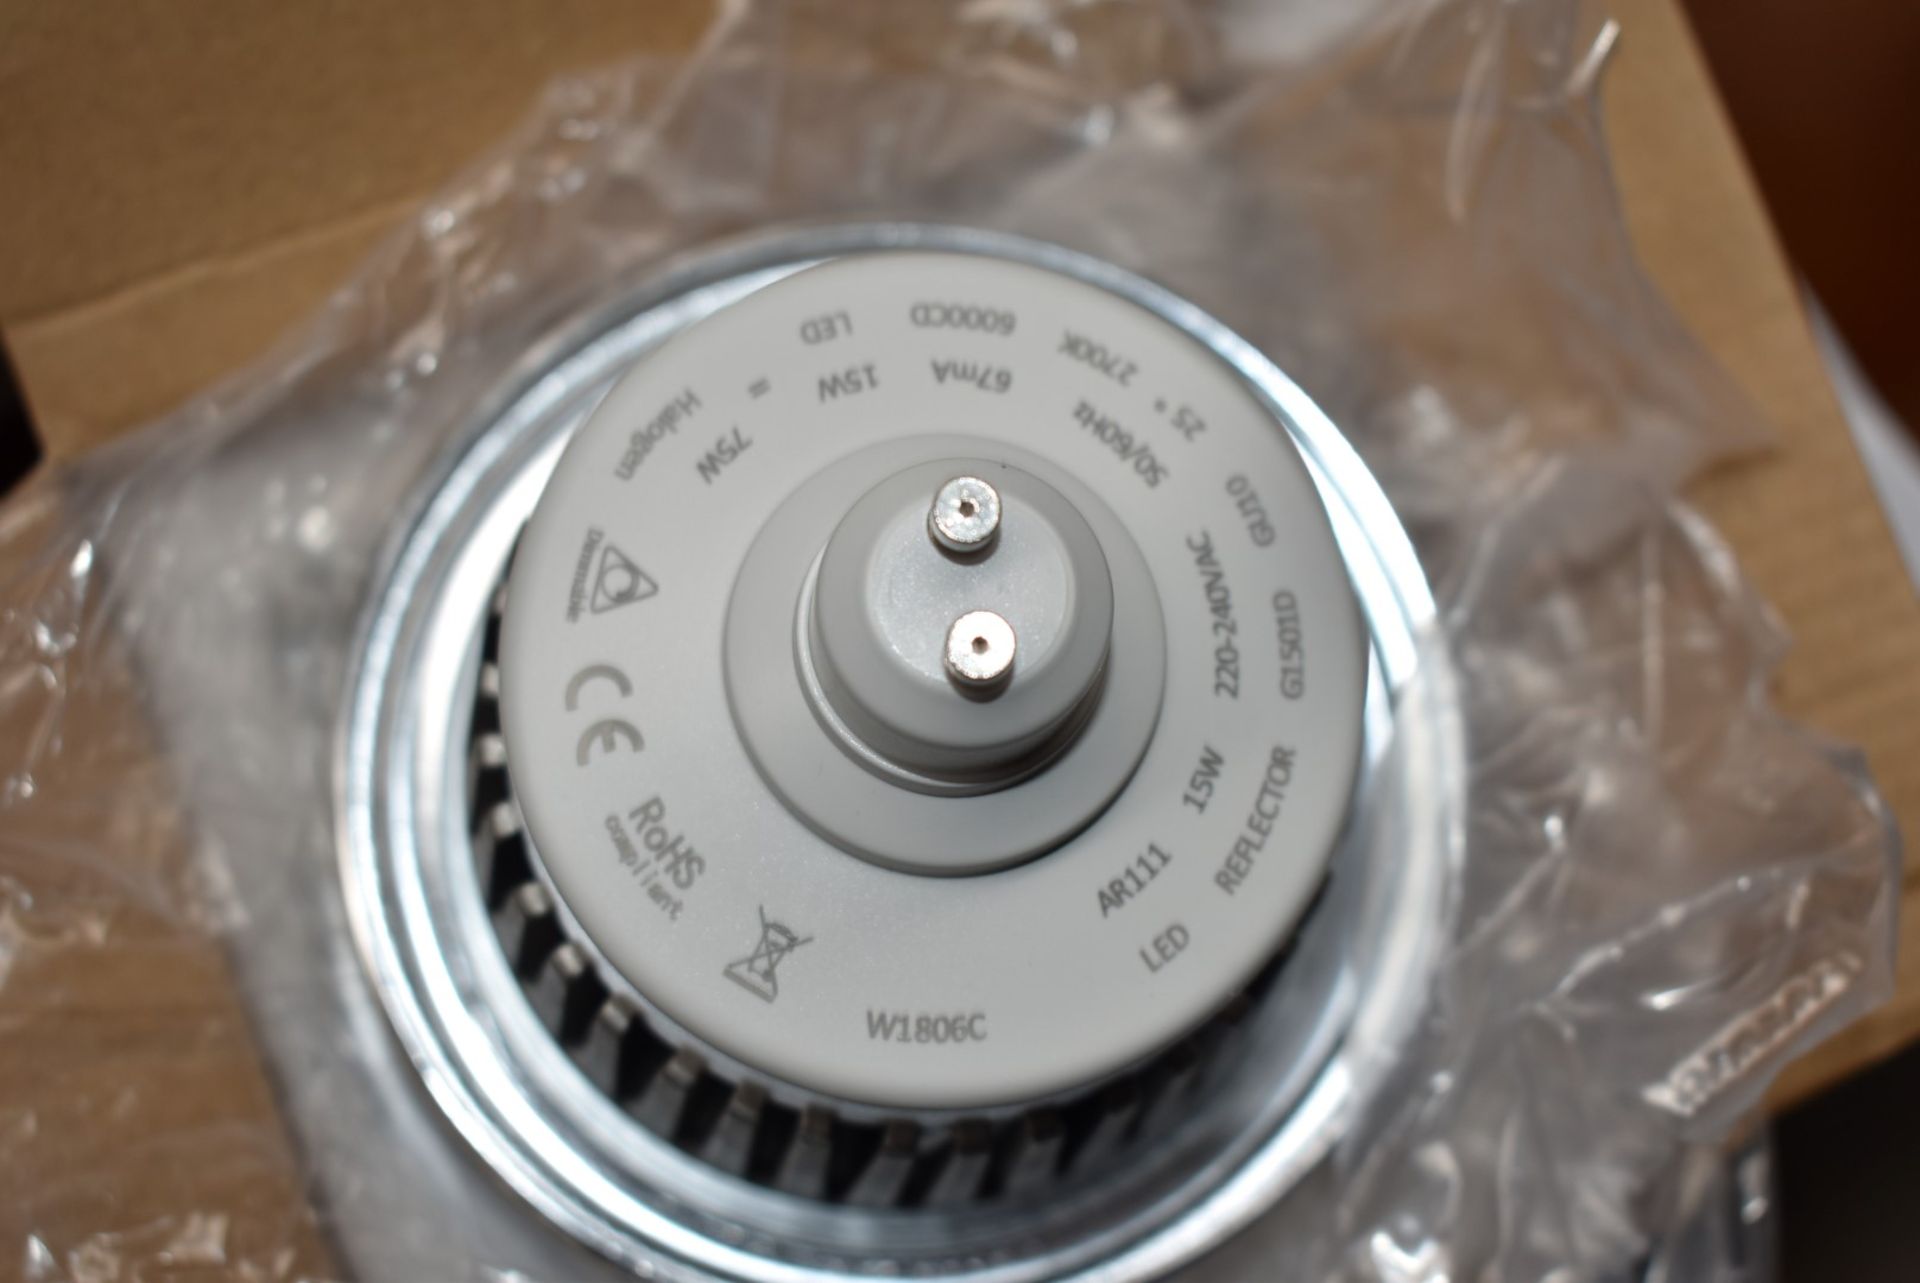 8 x MP Illuminations LED Reflector Light Bulb Fittings - New and Boxed - GU10 15W 2700K - Image 6 of 7